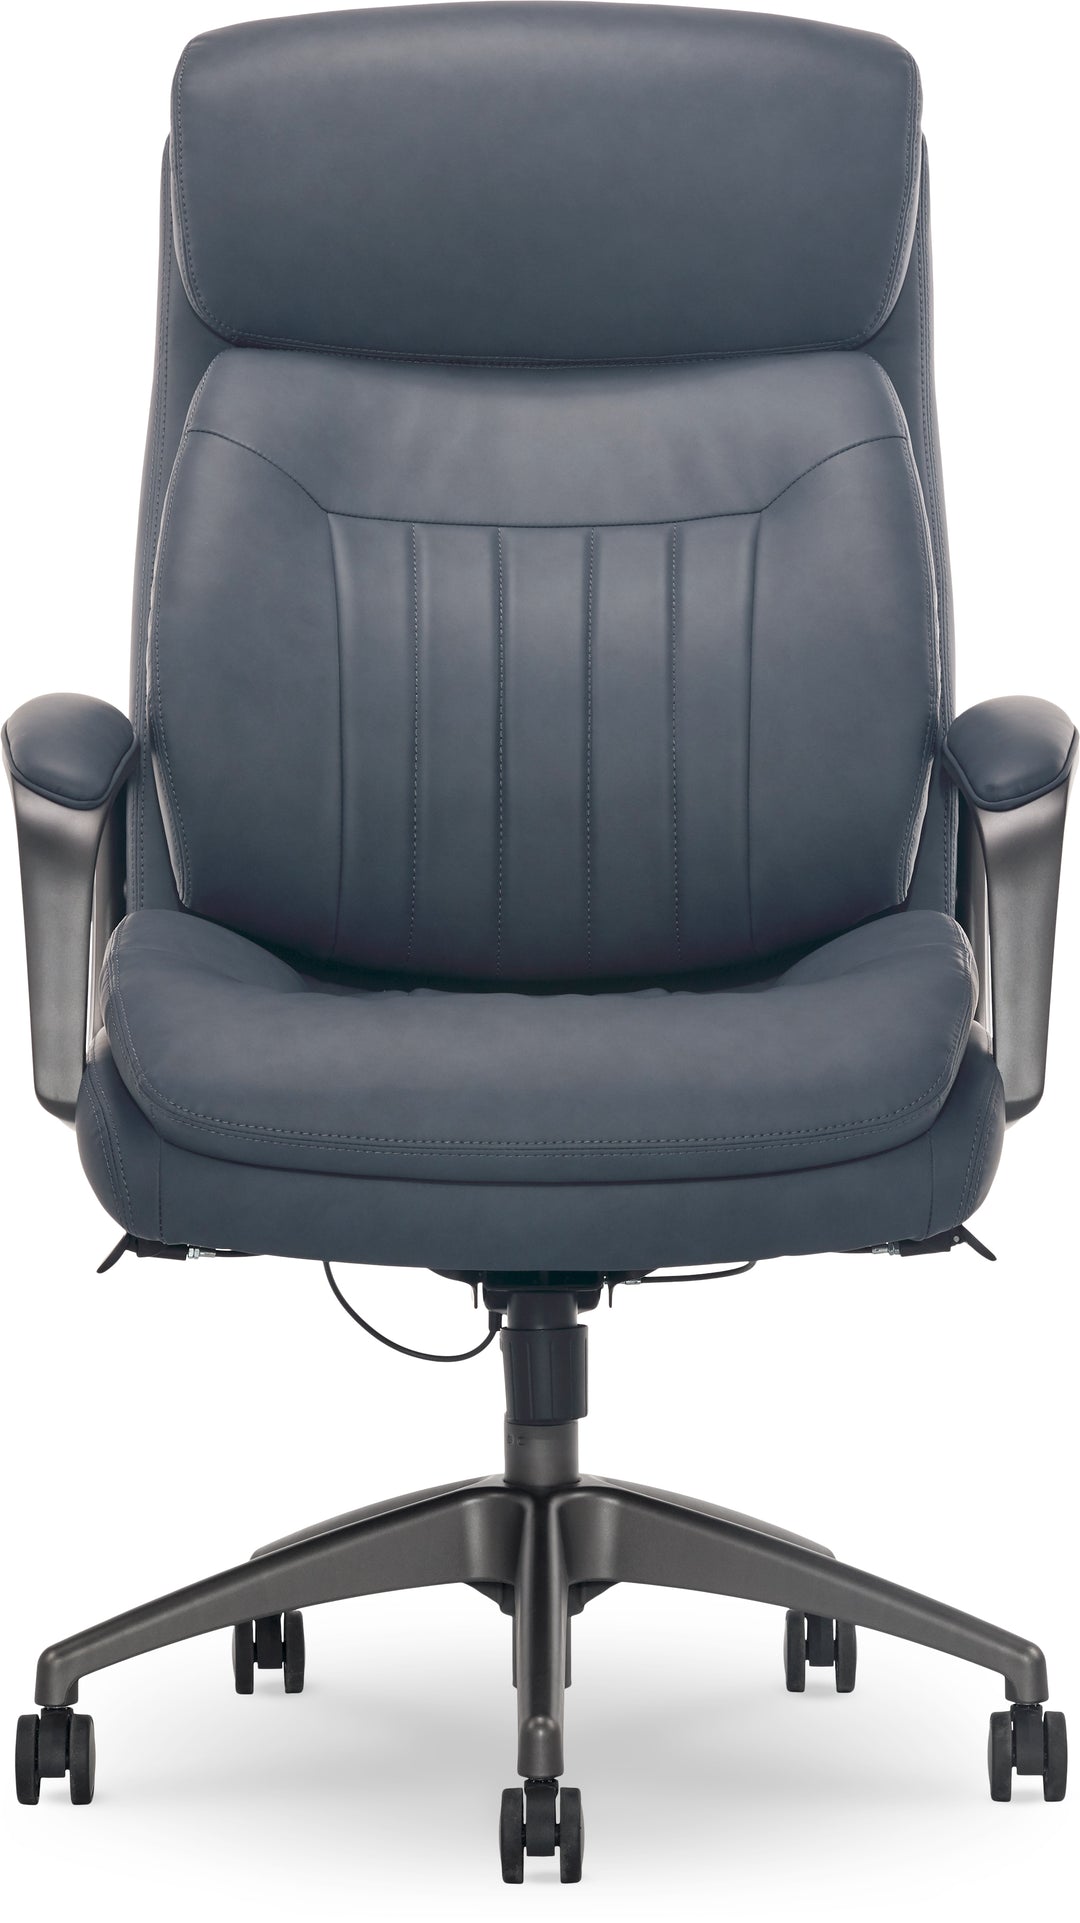 La-Z-Boy - Calix Big and Tall Executive Chair with TrueWellness Technology Office Chair - Slate_3